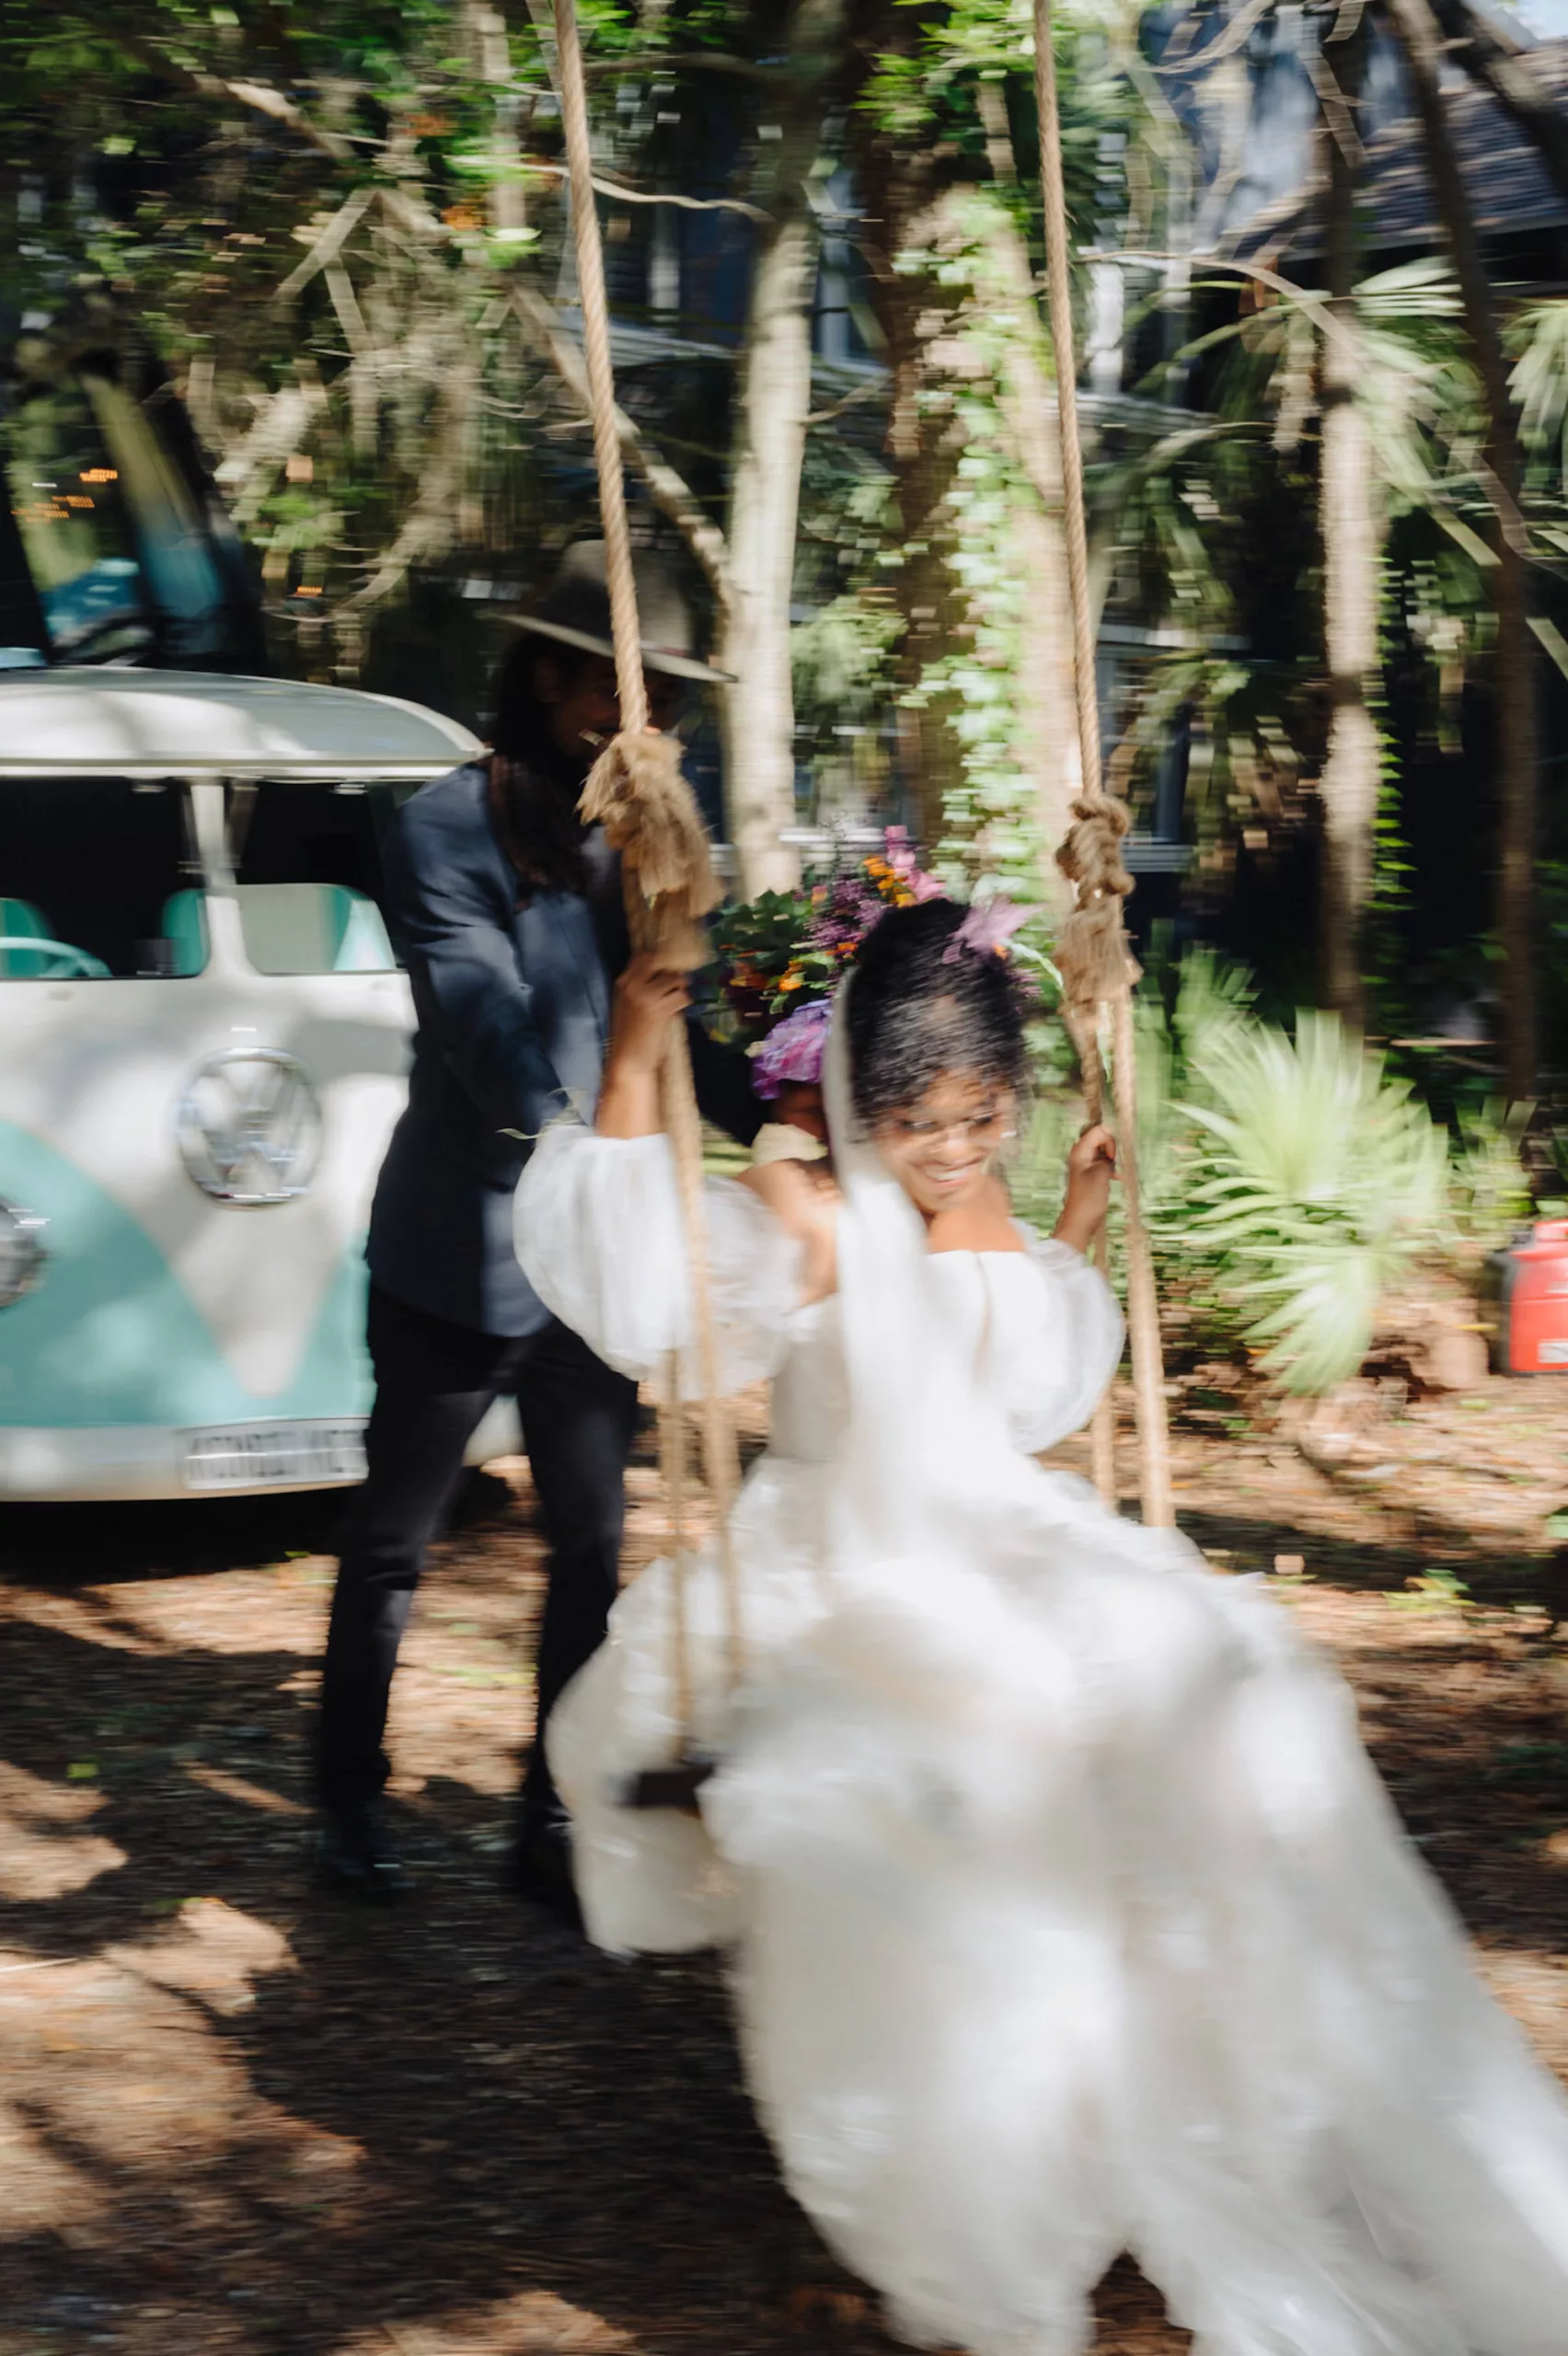 Groom Pushing Bride on Swing | Tampa Bay Photographer McNeile Photography